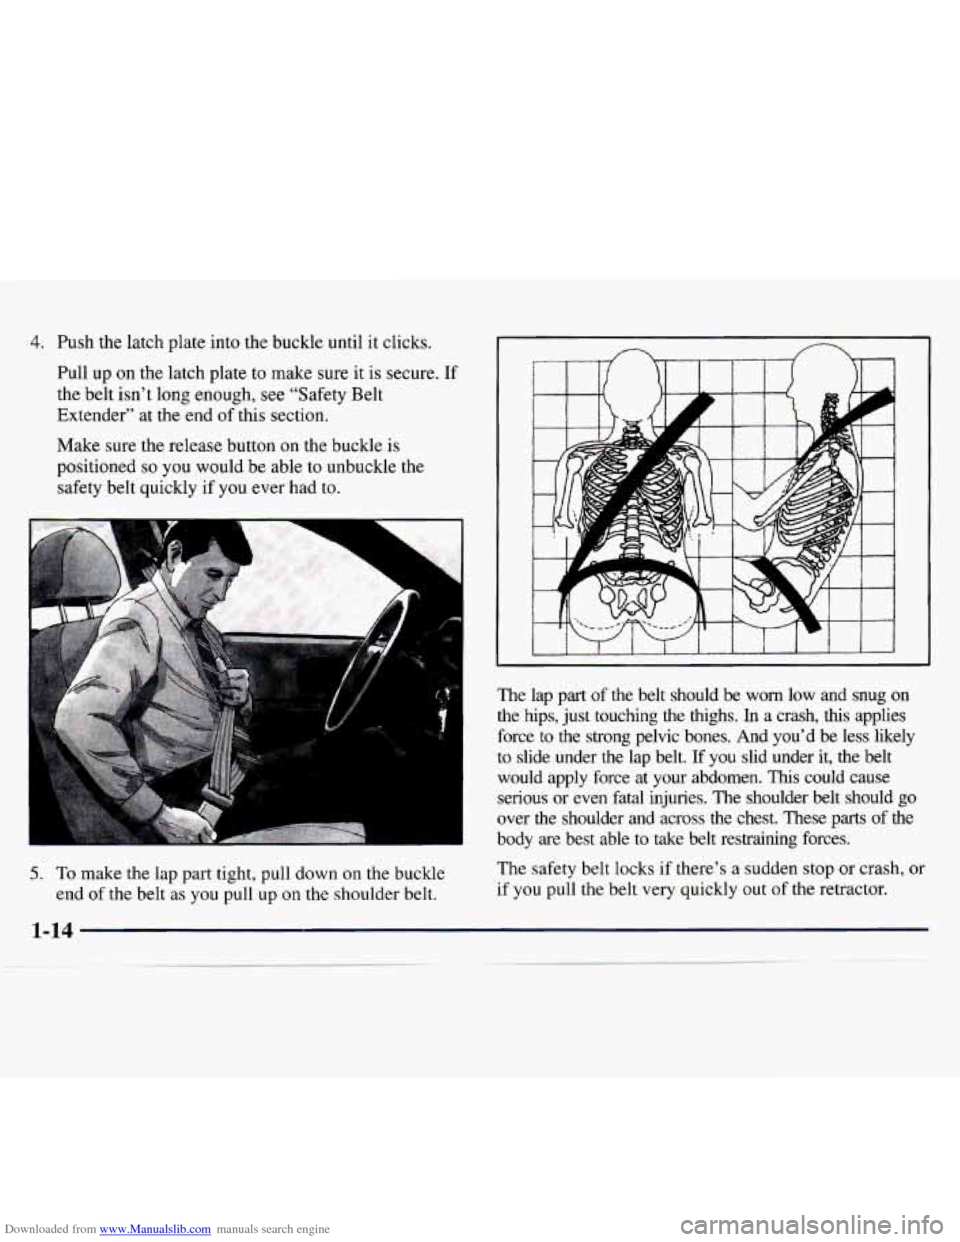 CHEVROLET MONTE CARLO 1997 5.G Owners Manual Downloaded from www.Manualslib.com manuals search engine 4. Push  the  latch  plate into the  buckle  until  it clicks. 
Pull  up on the  latch  plate 
to make  sure it  is secure.  If 
the  belt  isn